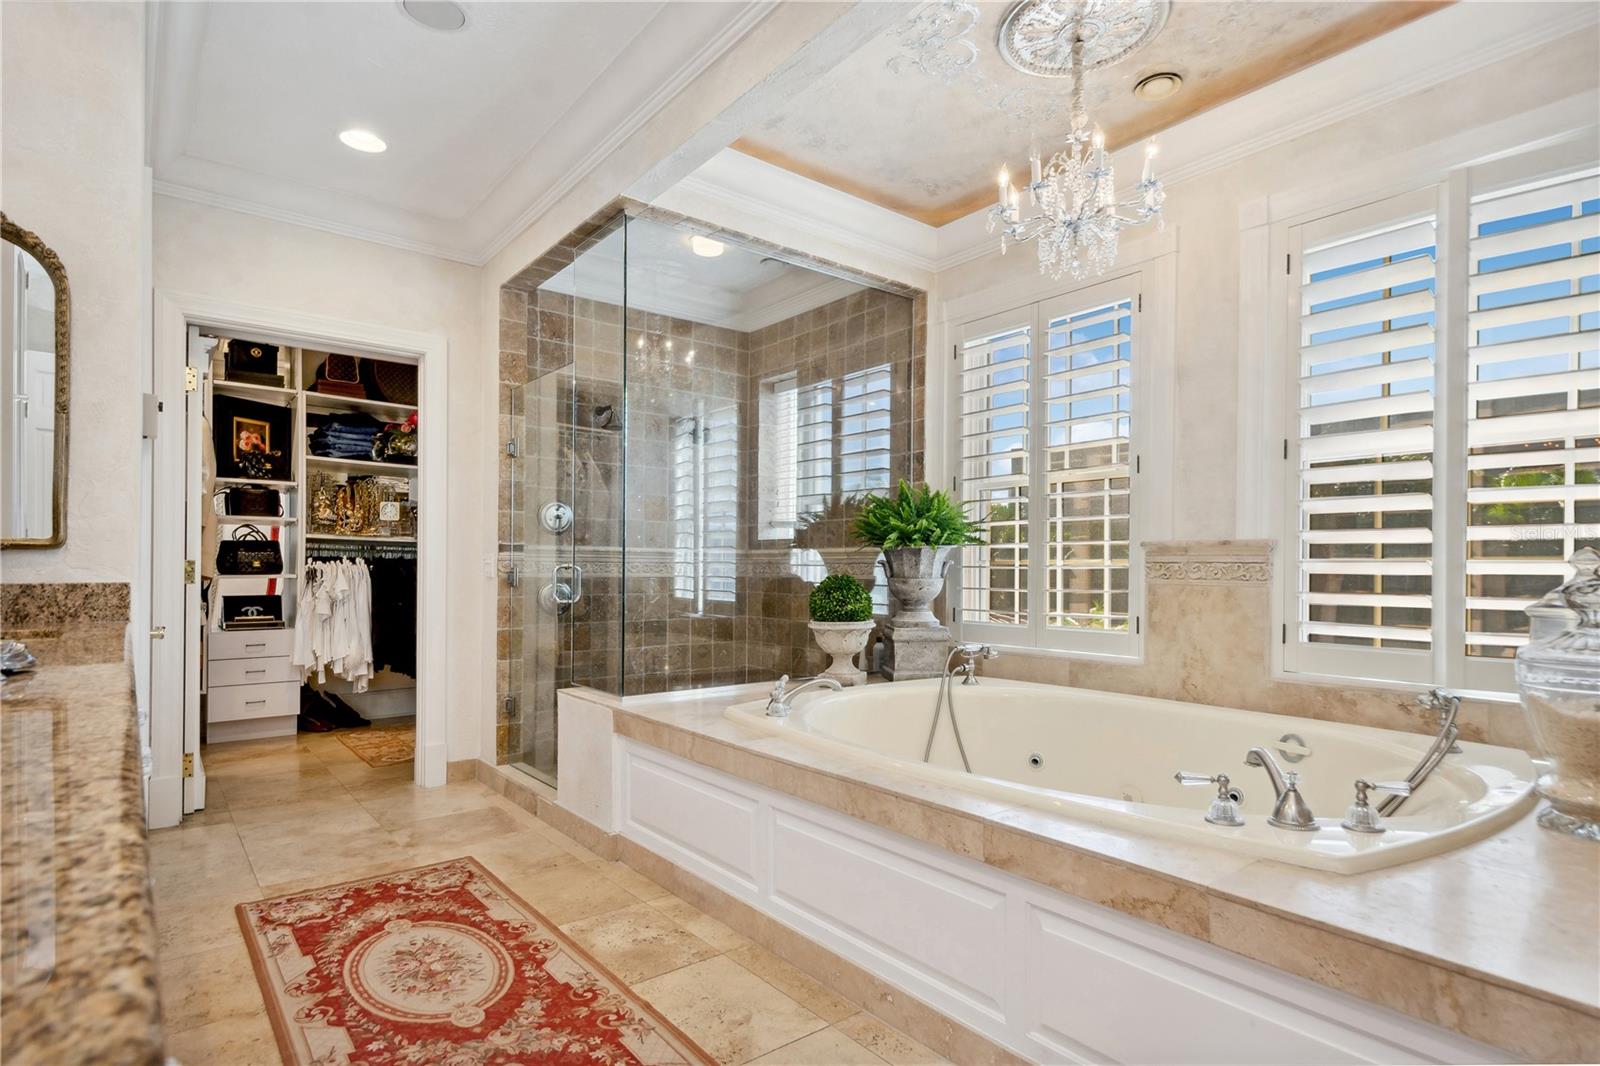 Primary bathroom with glass enclosed stand up shower and spa jacuzzi tub.